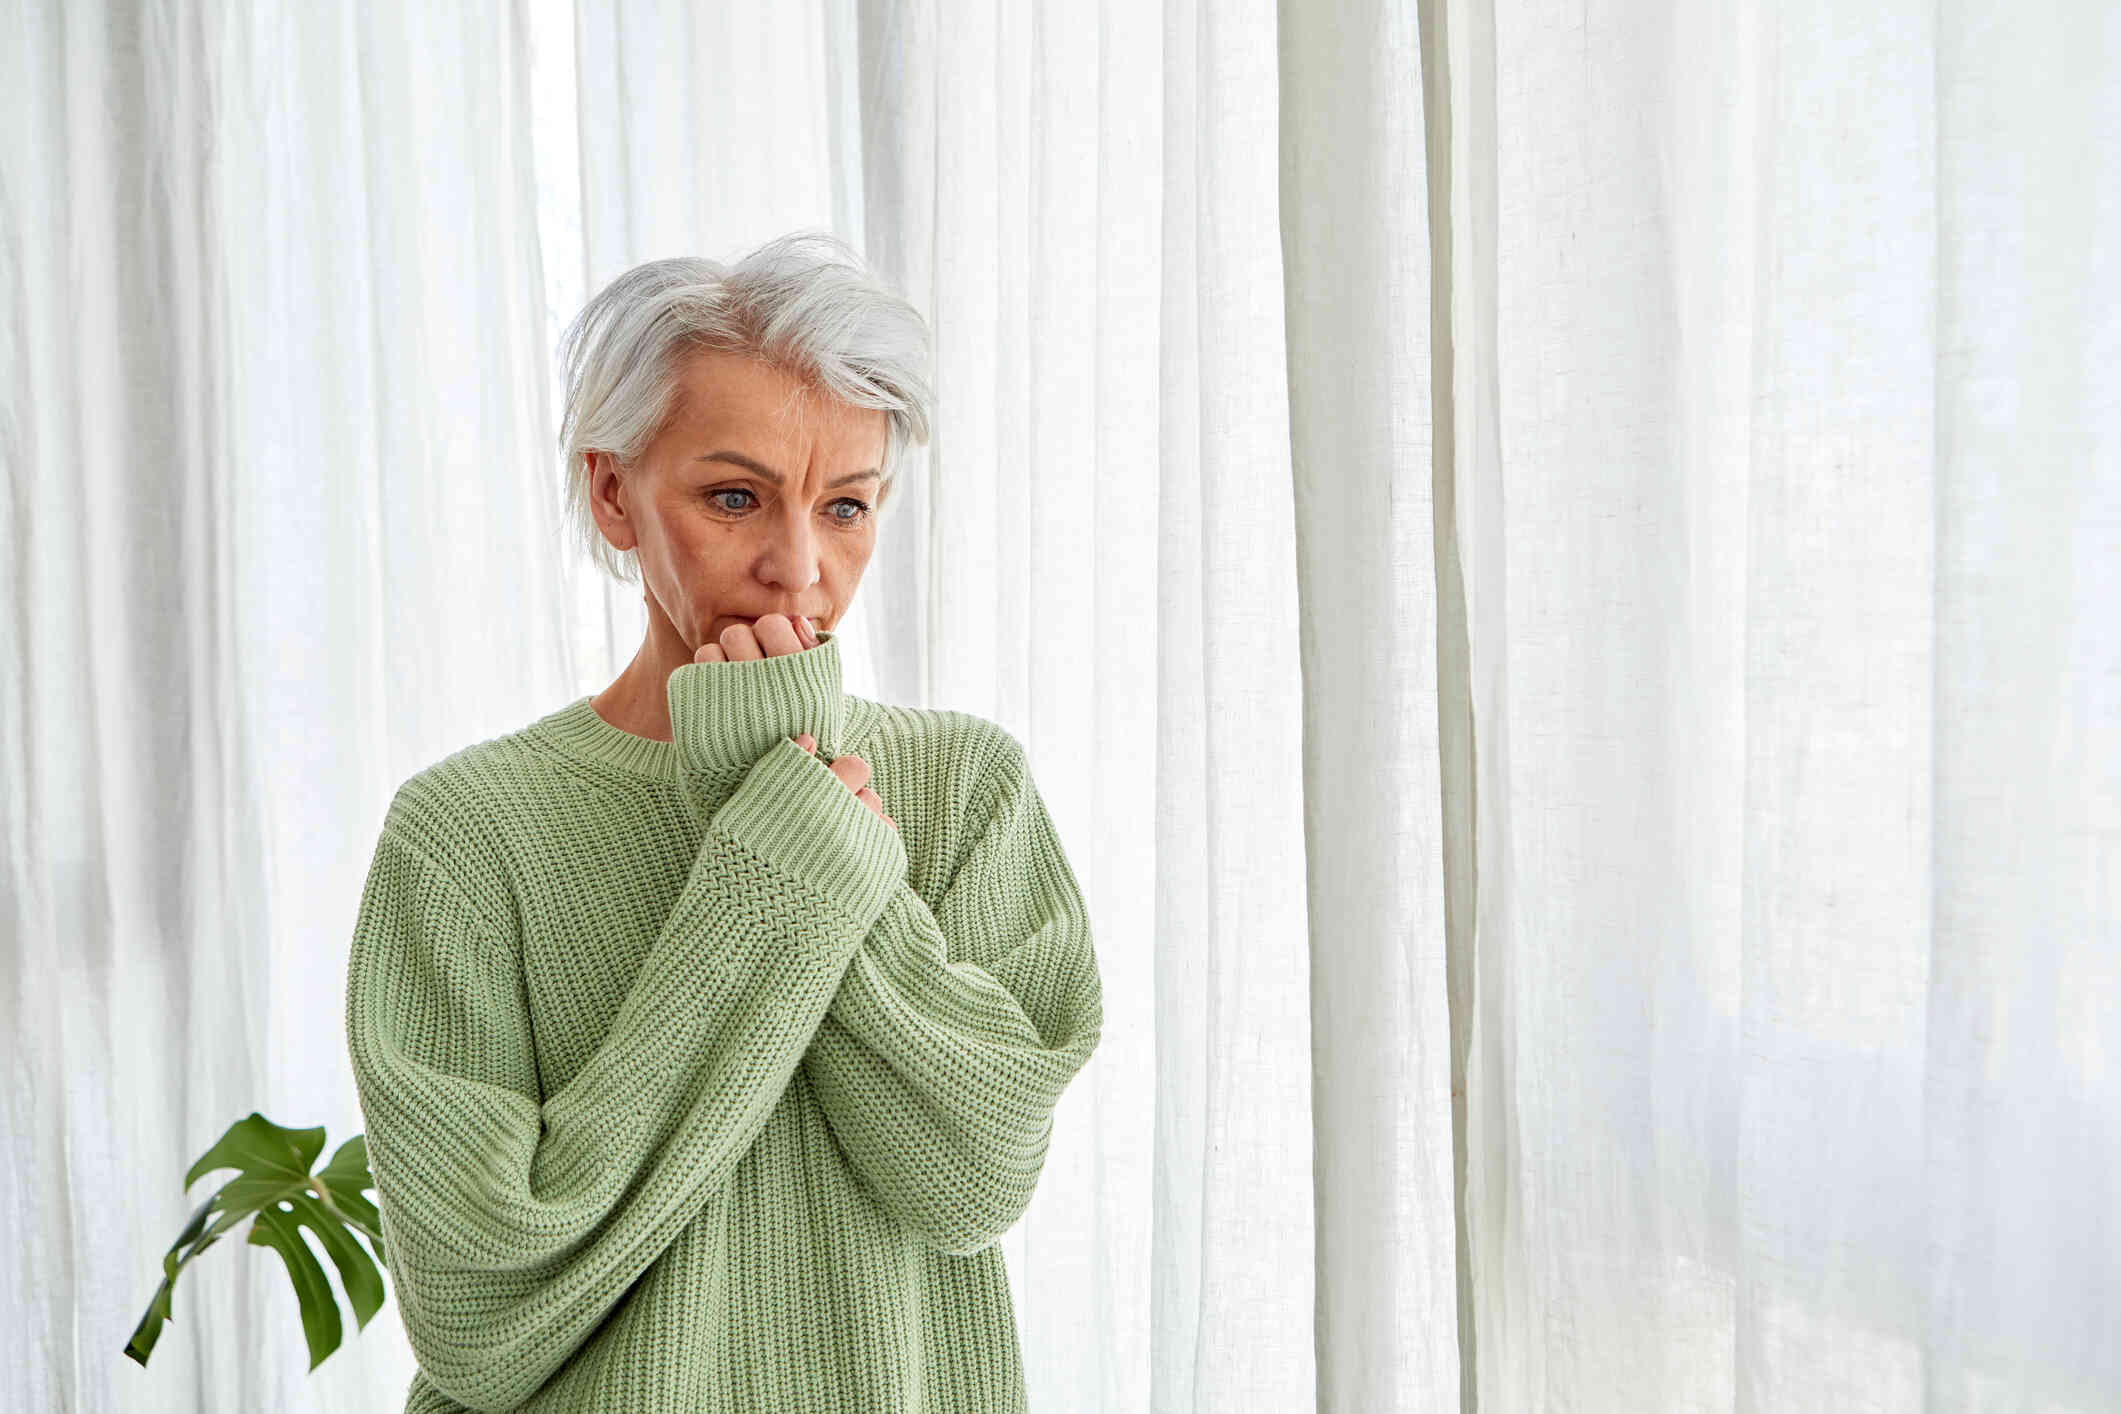 A mature woman in a green sweater looks stressed as she stands in her home and presses her hand to her face.